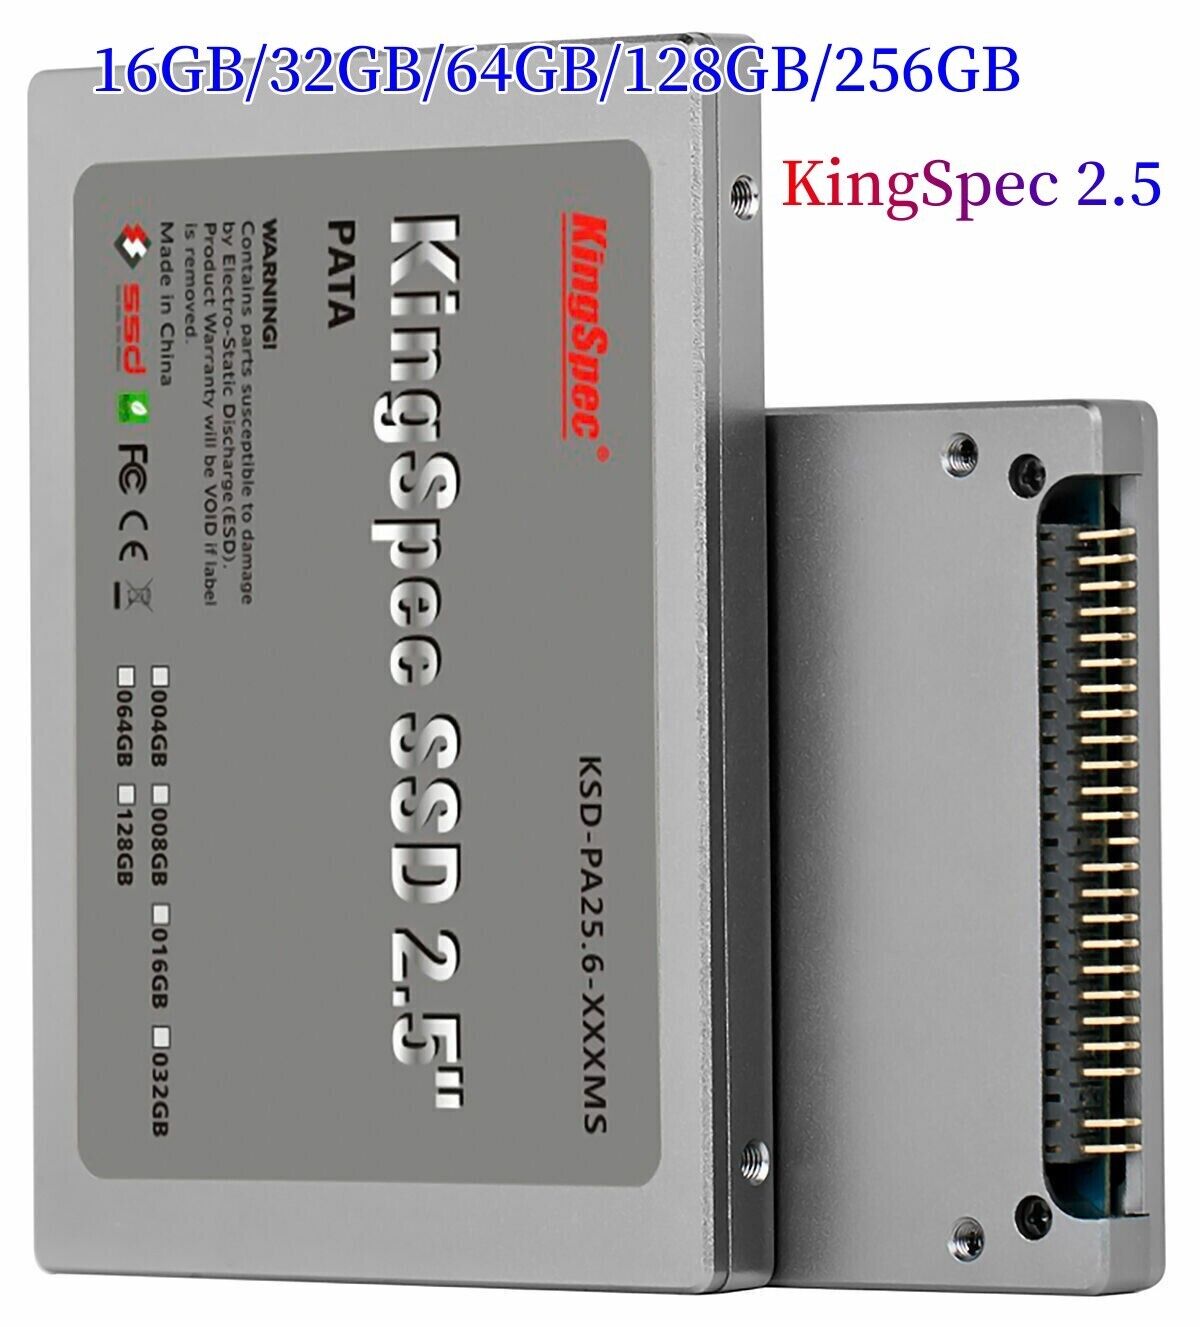 KingSpec 2.5-inch PATA/IDE SSD Solid State Disk MLC Flash SM2236 Controller